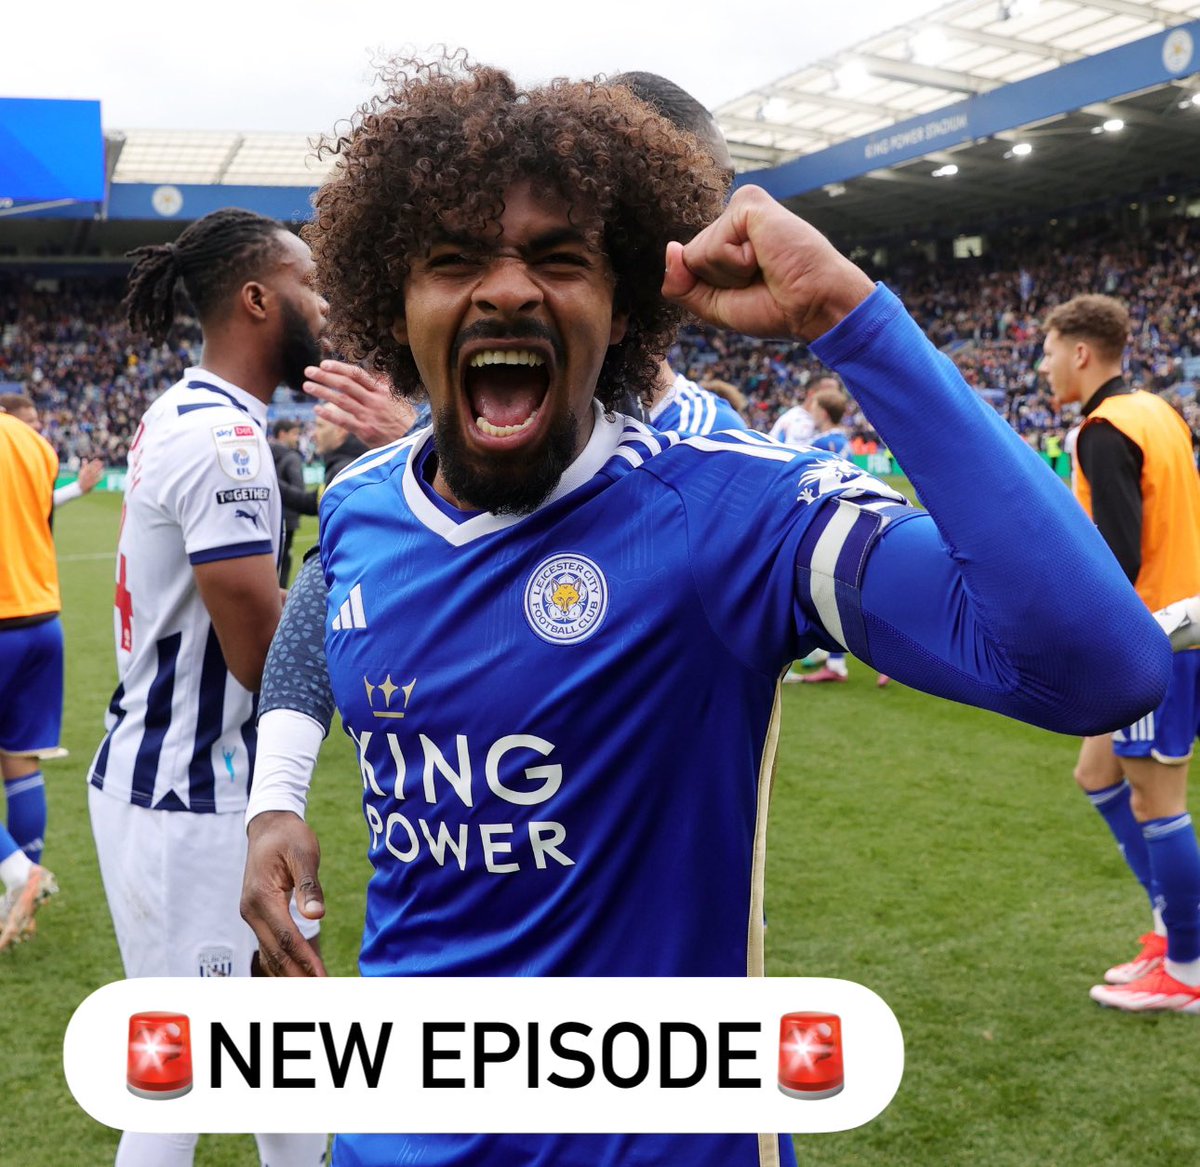 🚨NEW EPISODE🚨 Big Strong Leicester Boys - £25!? You havin a laugh? A season ticket own goal, a win against West Brom and a clash of the titans as @AitchGregory is back on the pod. 🔗 open.spotify.com/episode/1tUr9t… #LCFC 🦊💙